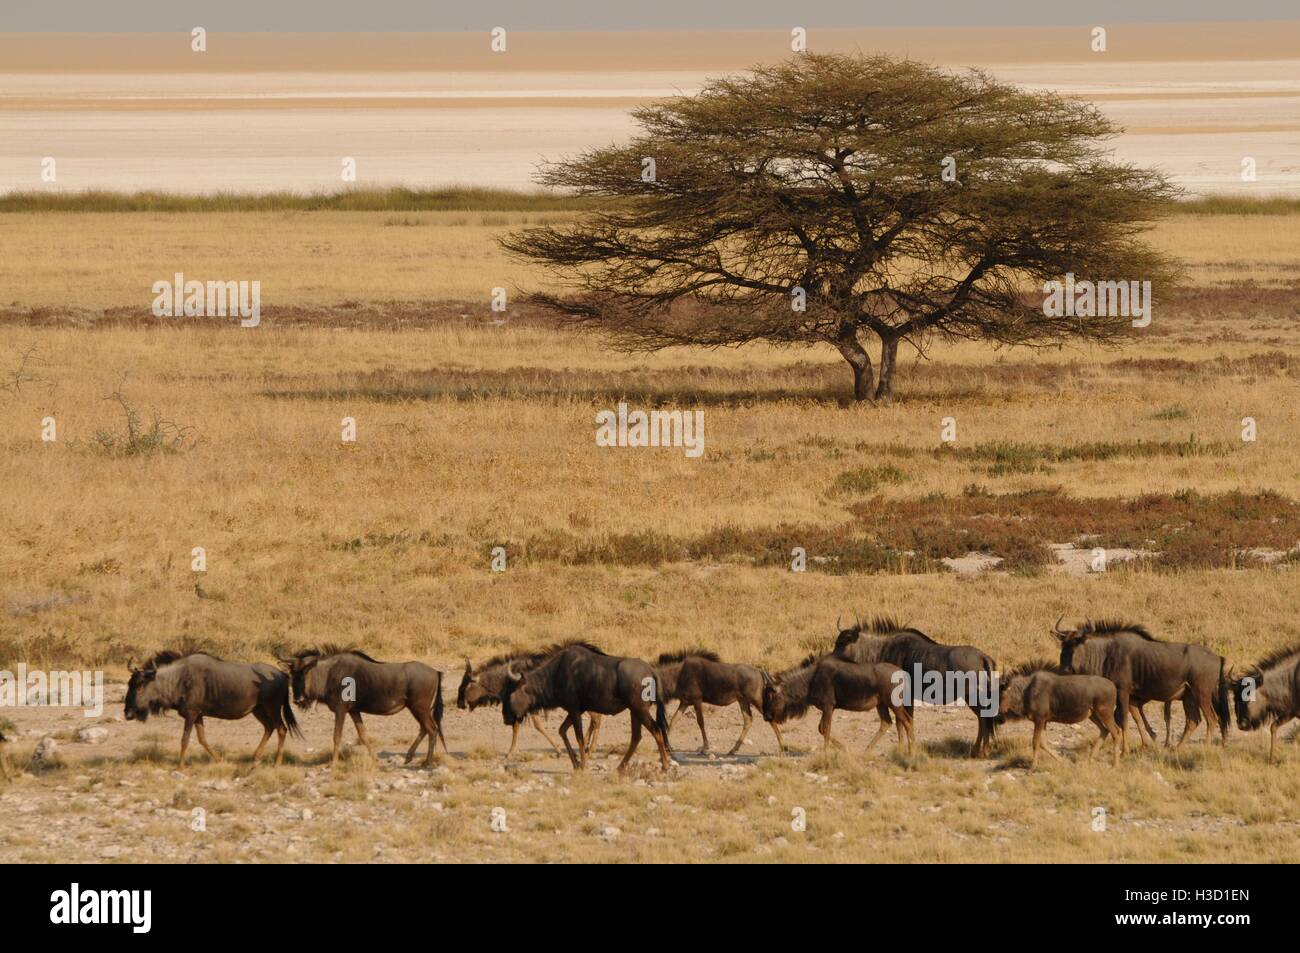 A group of antelopes at the heart of Etosha National Park in Namibia Stock Photo